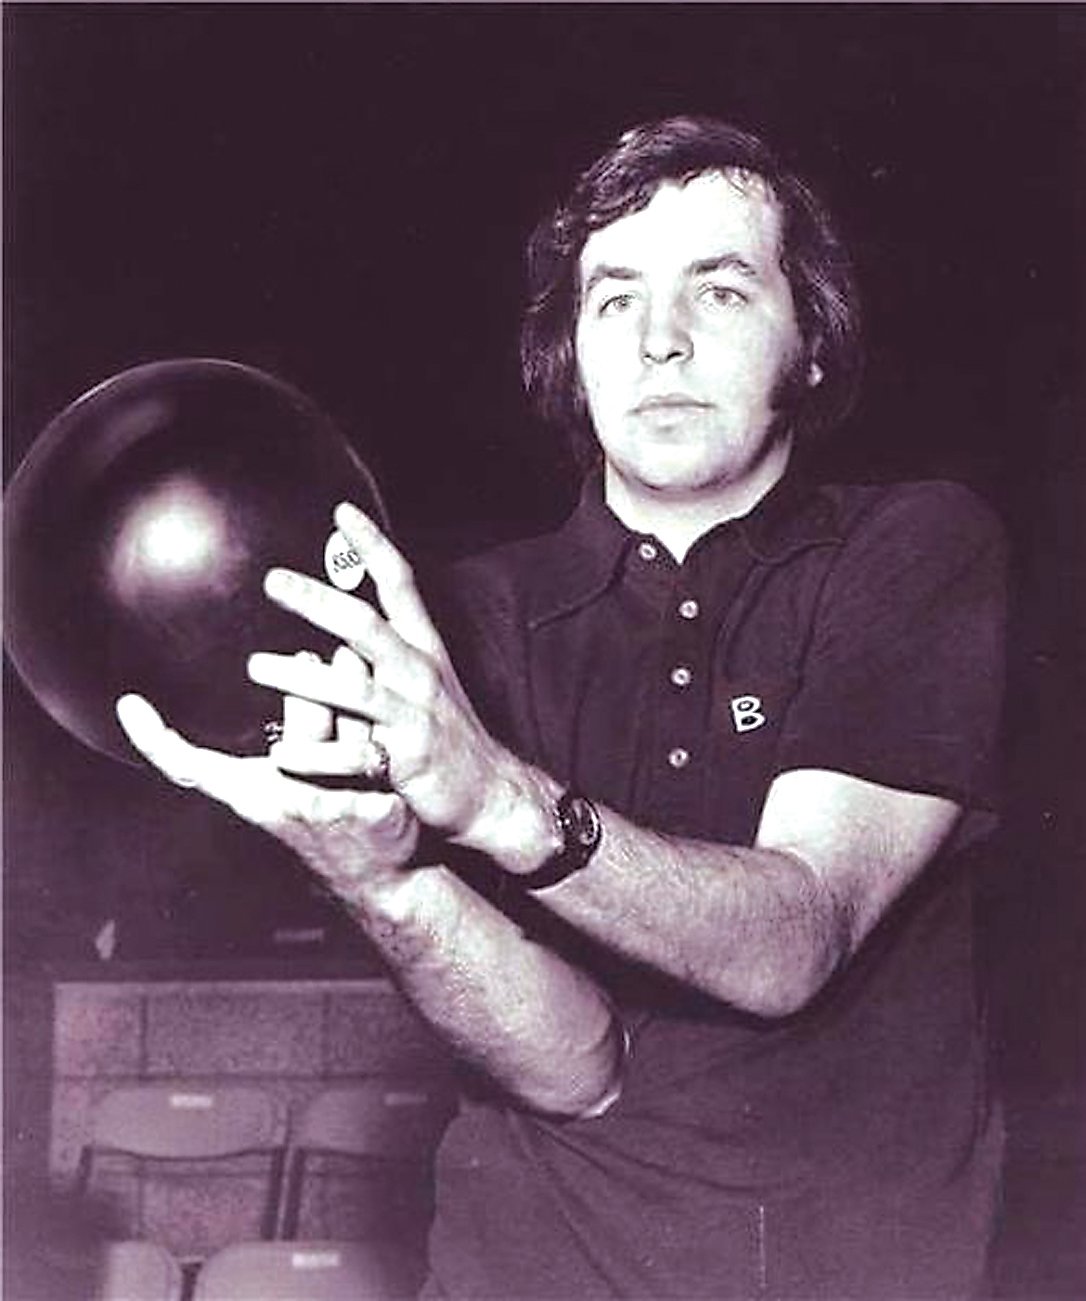 The late Mark Roth during his younger years bowling in the Professional Bowling Association tour.